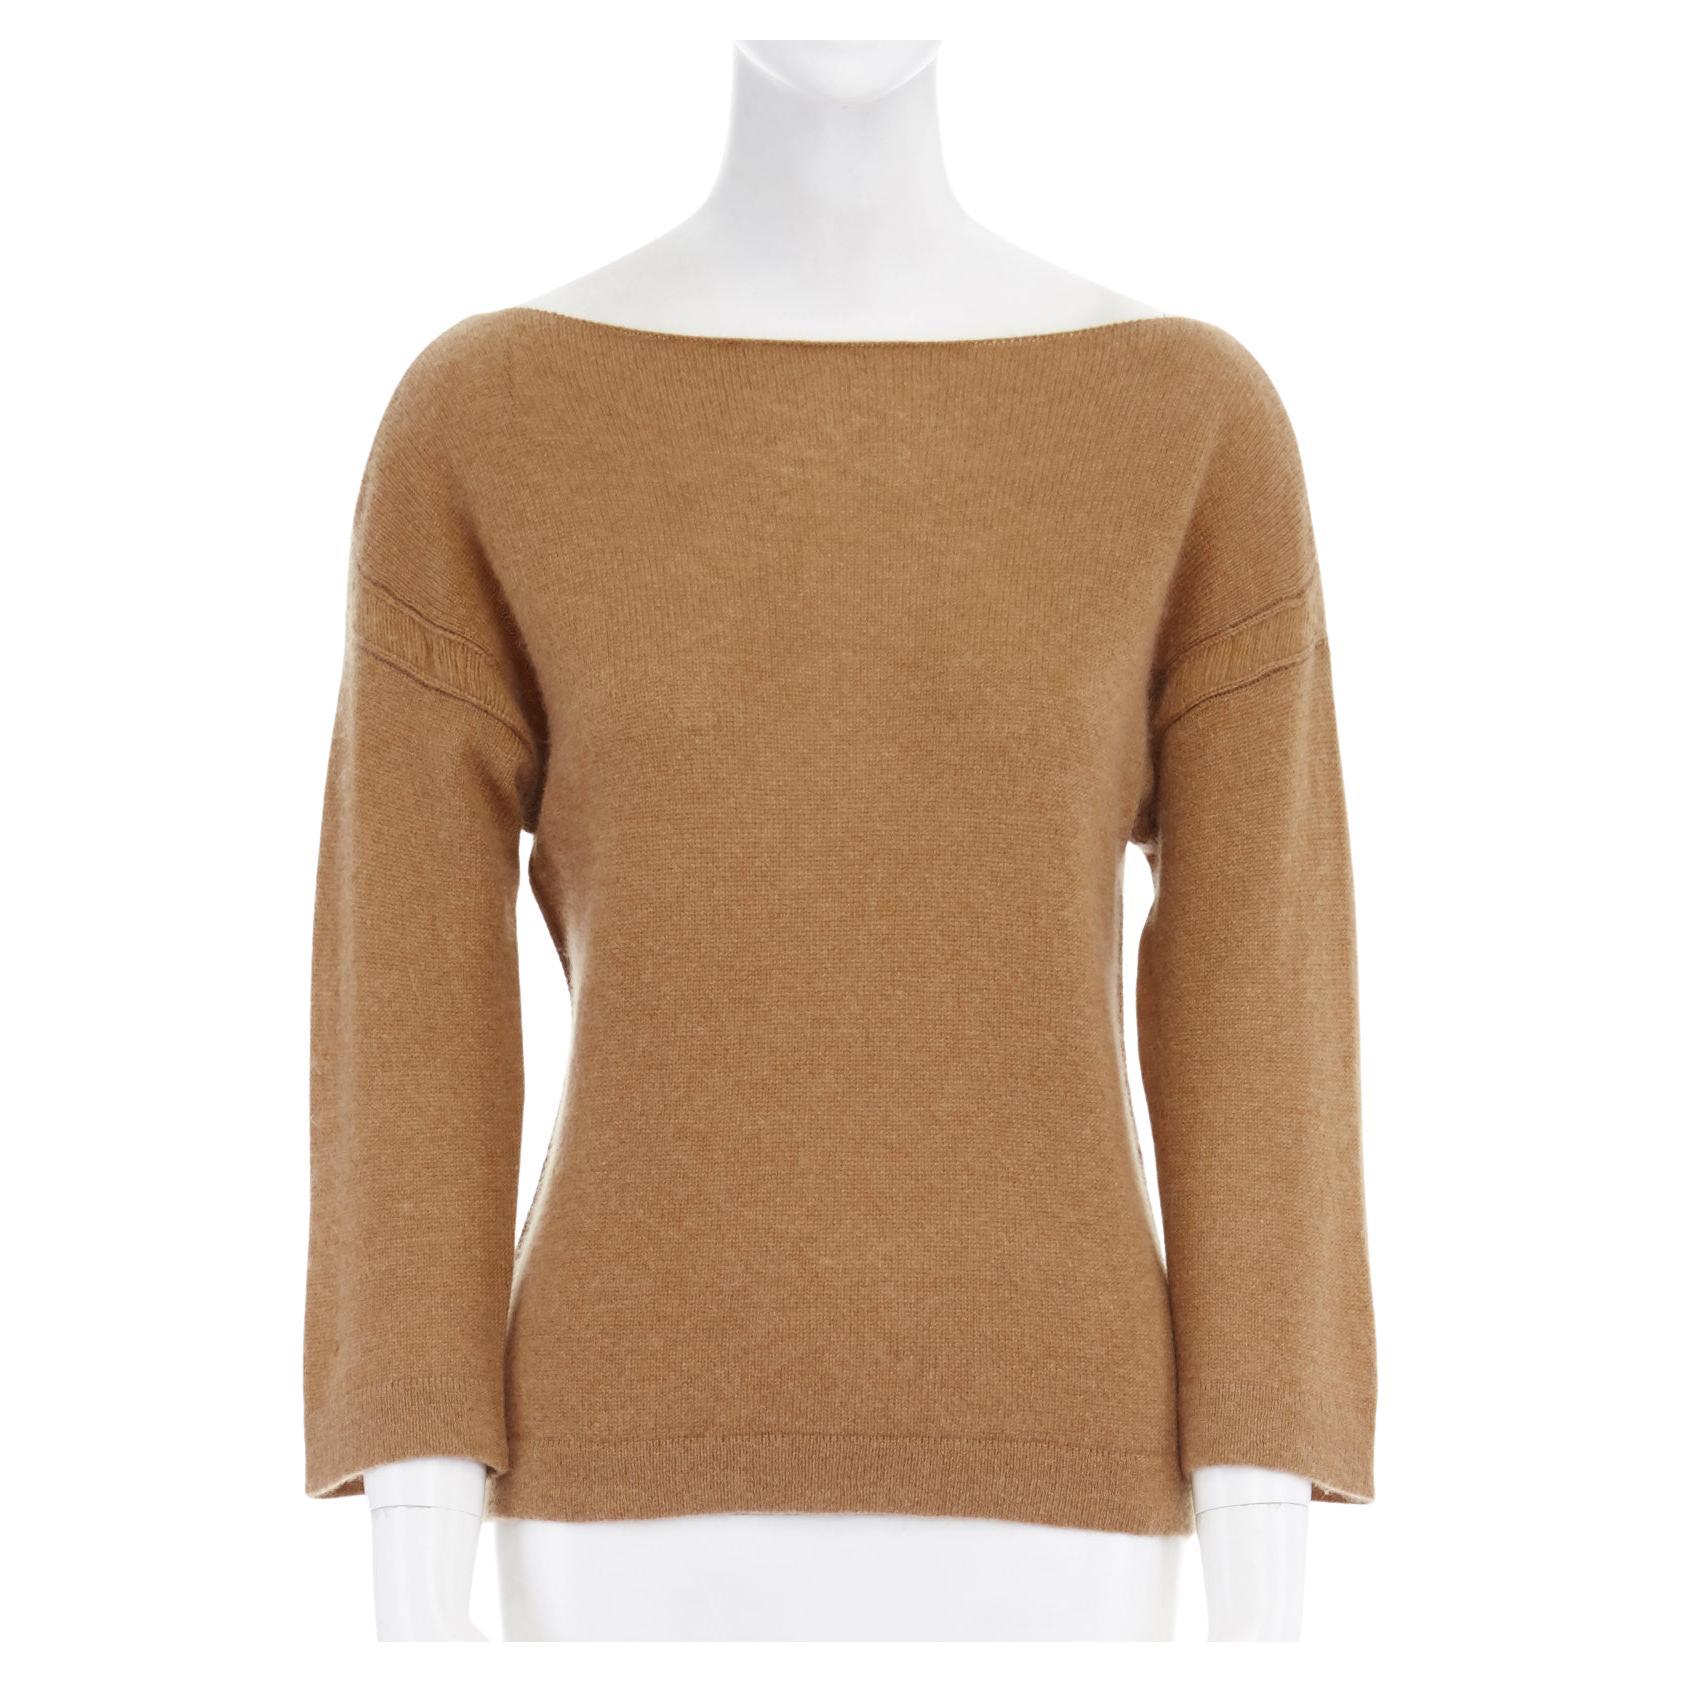 CHLOE 100% cashmere camel brown wide boat neck ladder stitch sweater top S